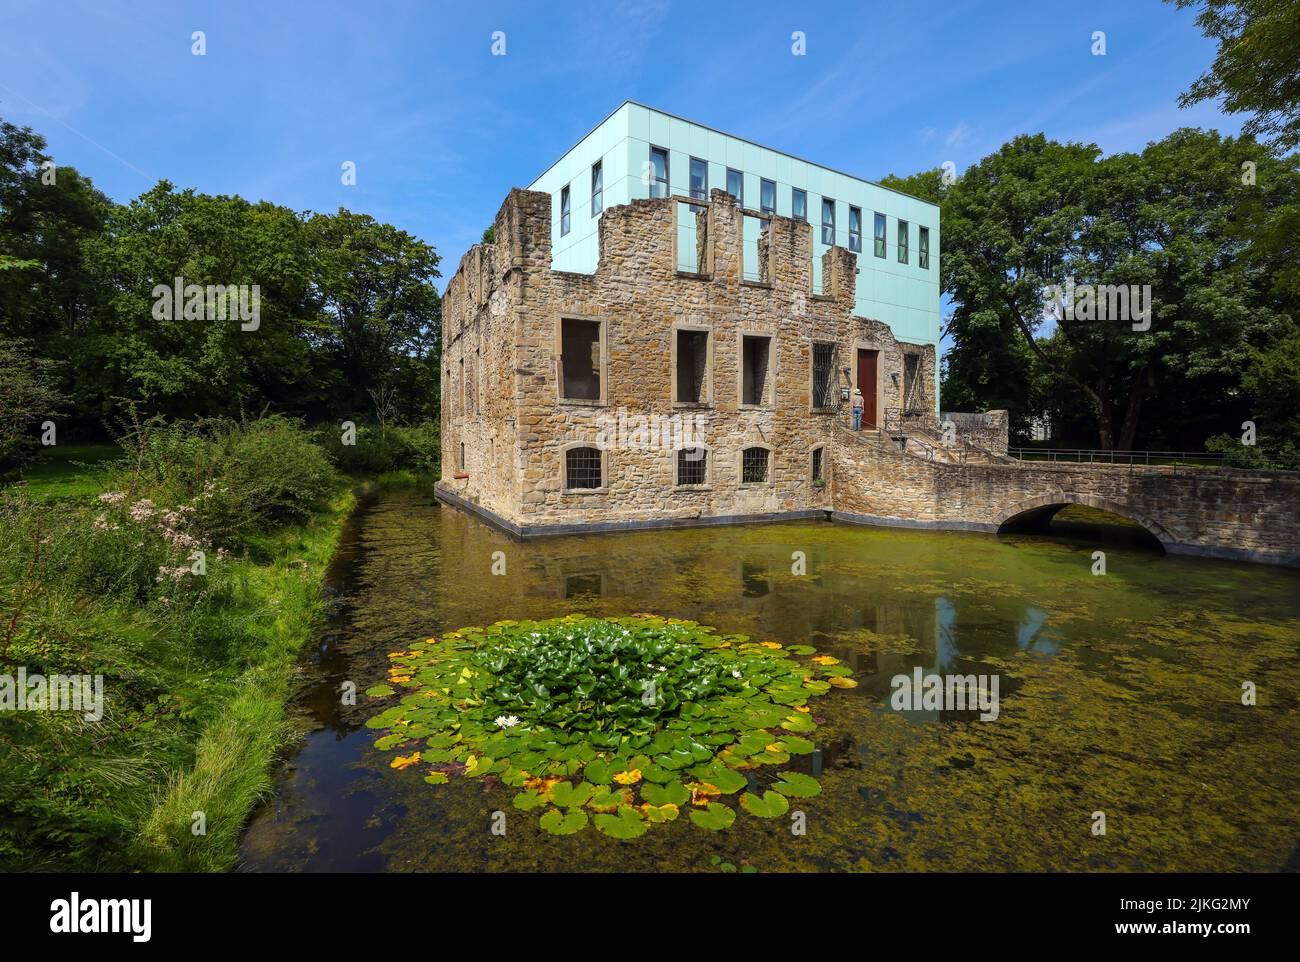 24.05.2022, Germany, North Rhine-Westphalia, Bochum - Castle park Weitmar. Park with the ruins of a mansion from the 16th century, the Weitmar House, Stock Photo